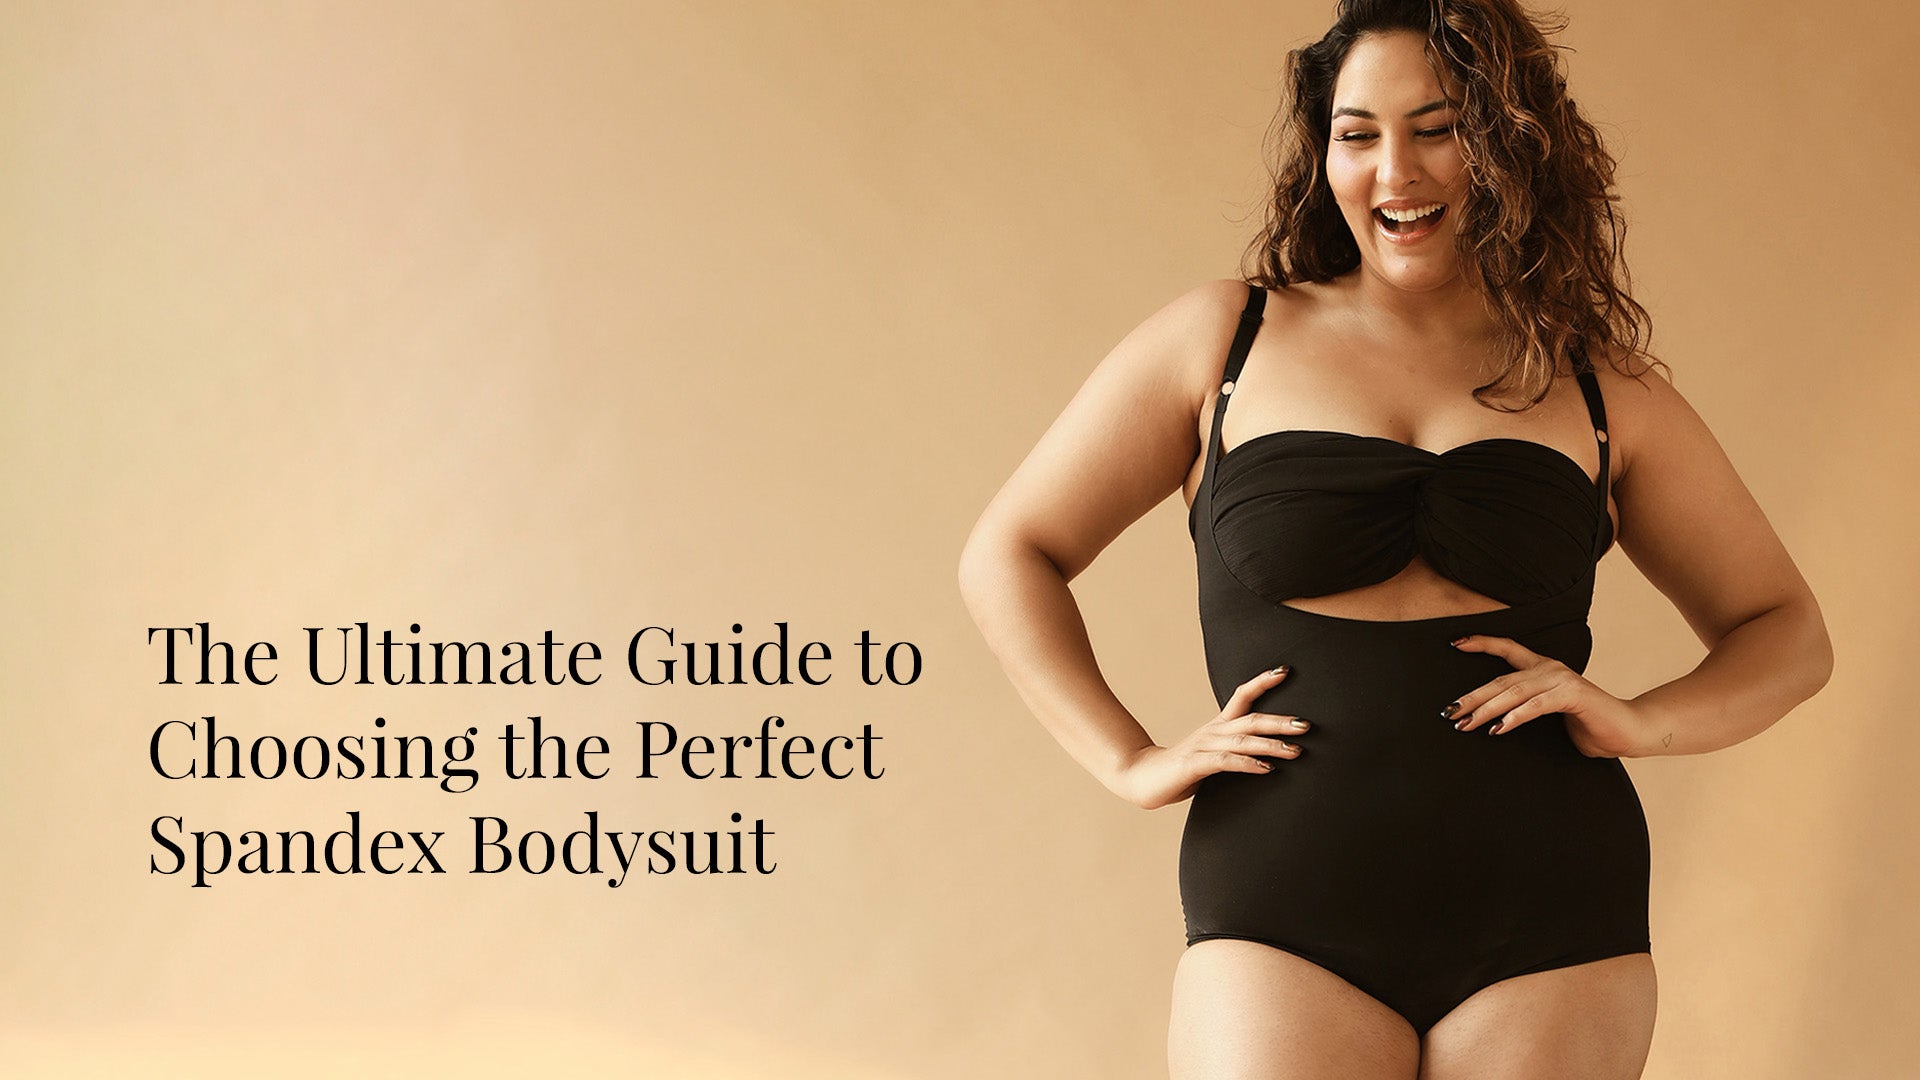 The Ultimate Guide to Choosing the Perfect Spandex Bodysuit